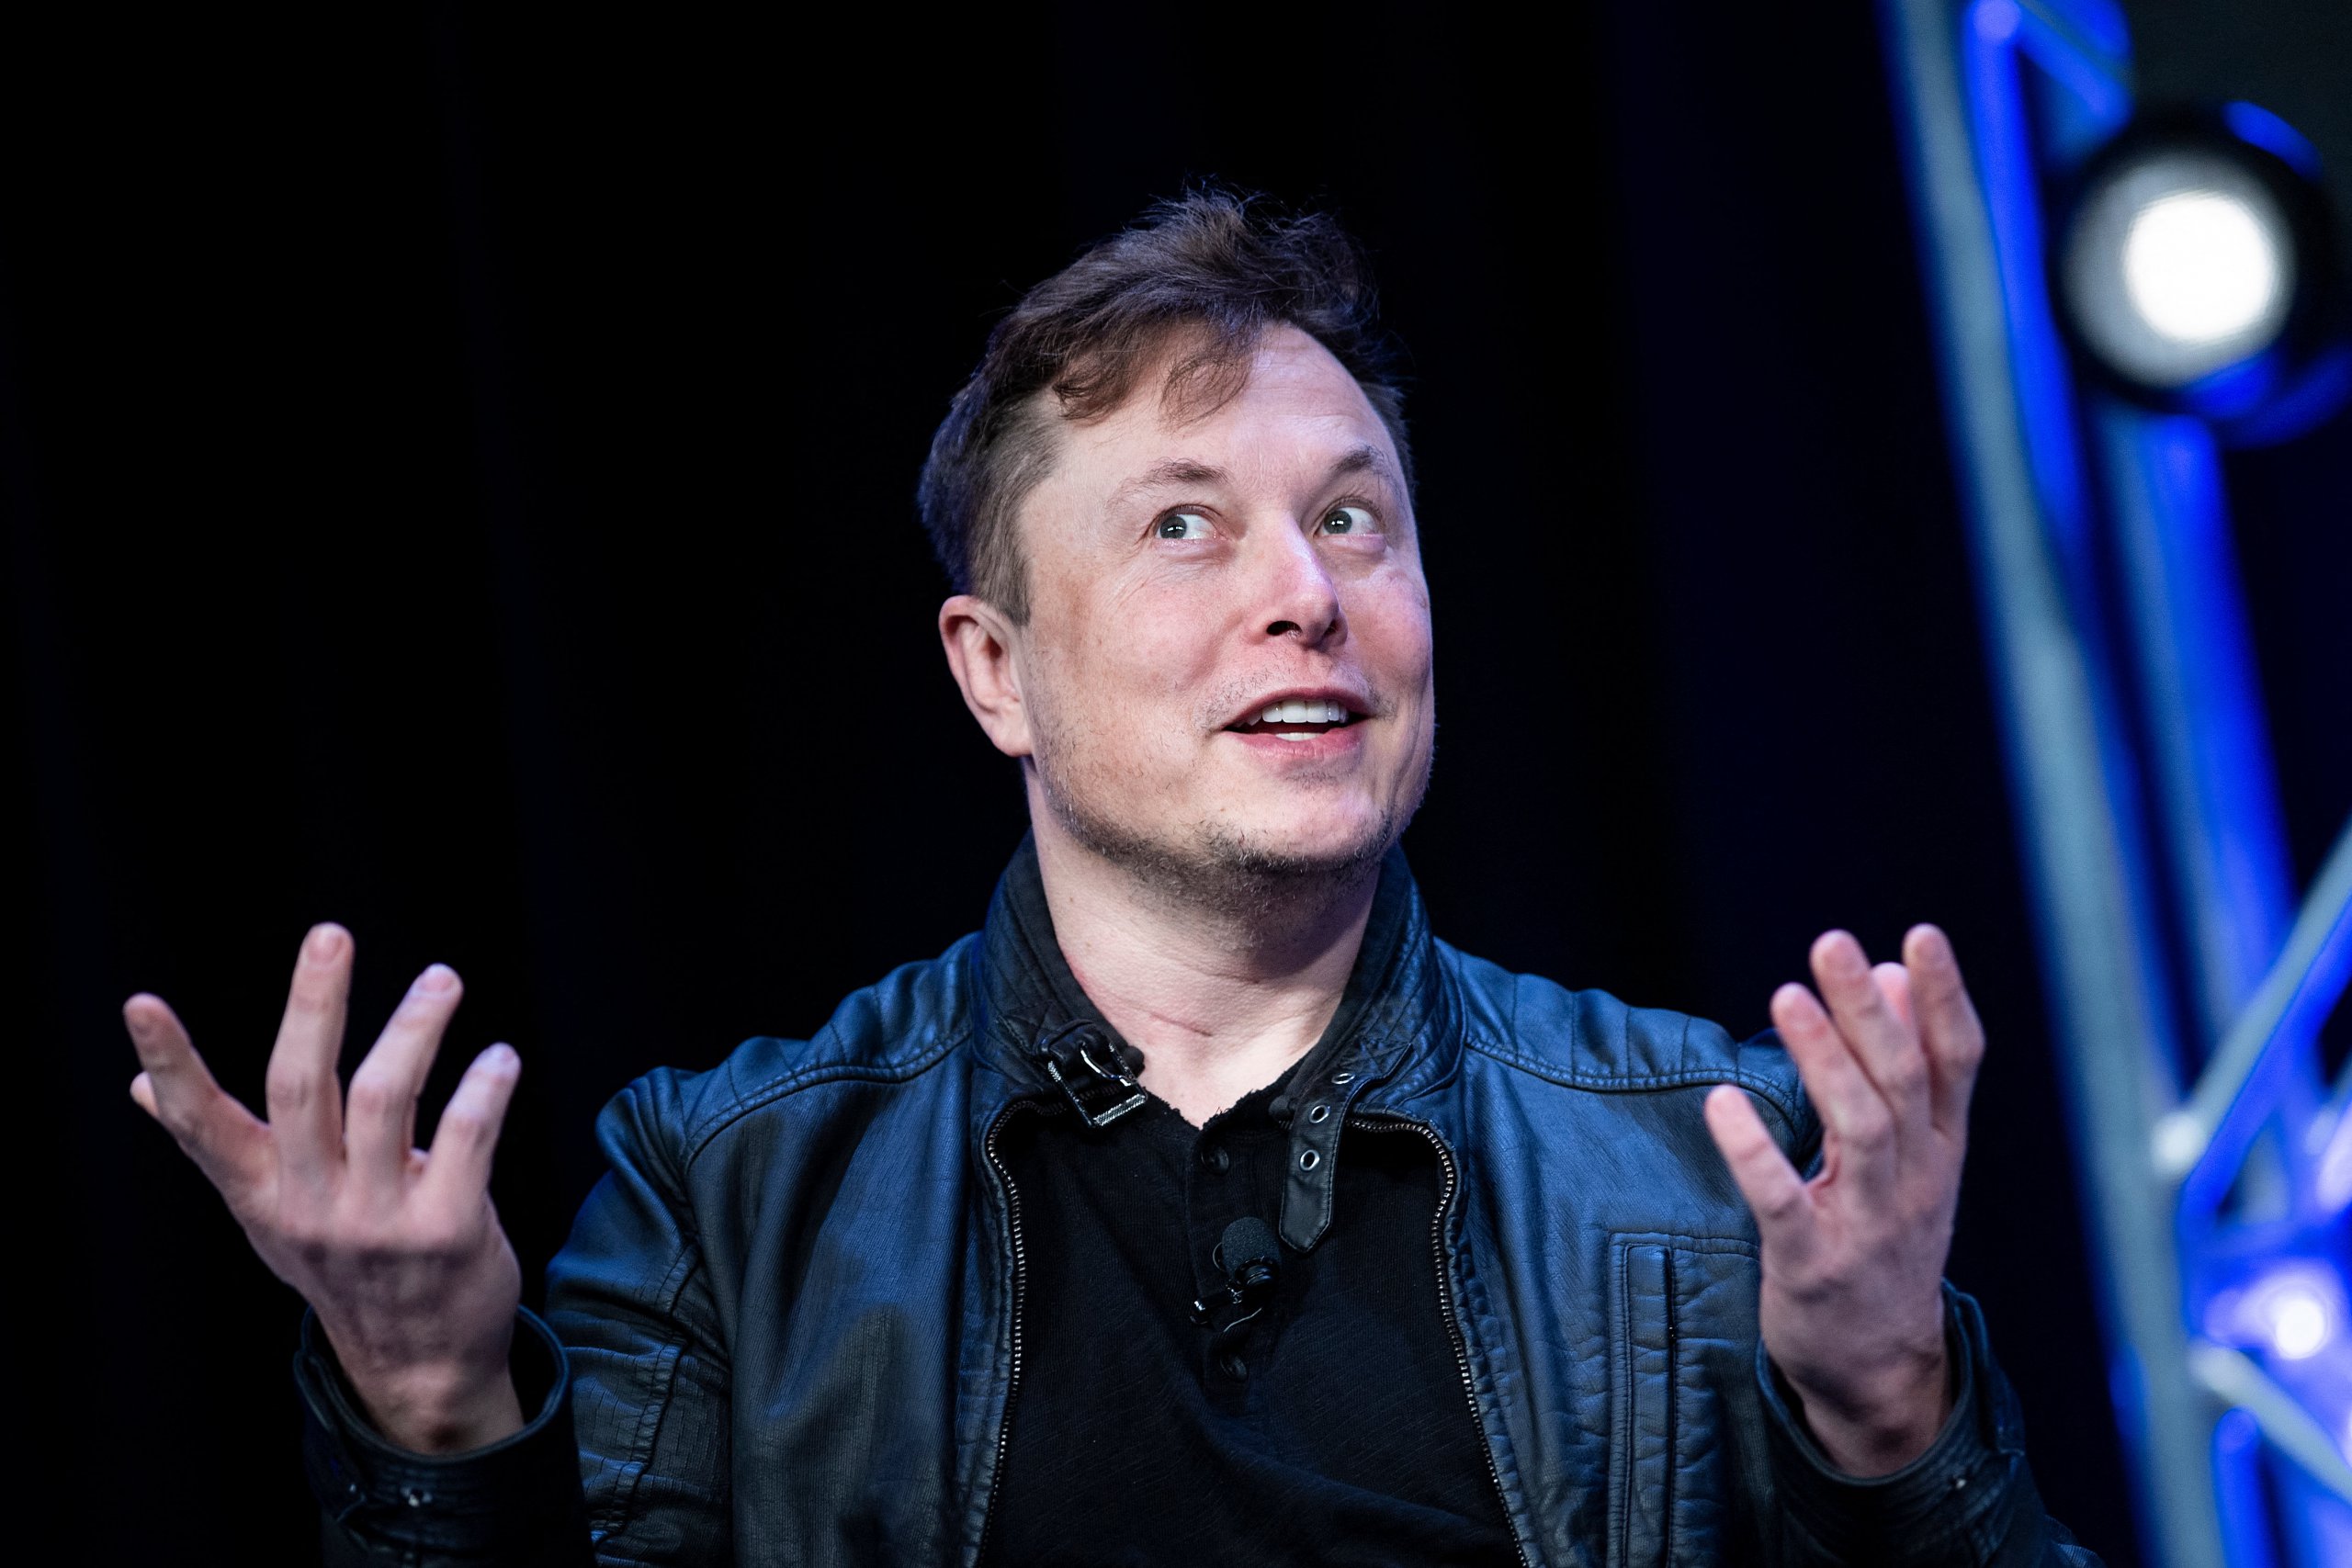 Tesla chief Elon Musk turned down a seat on the Twitter board and spotlighted strategic boardroom ploys a major shareholder can pull in a public company